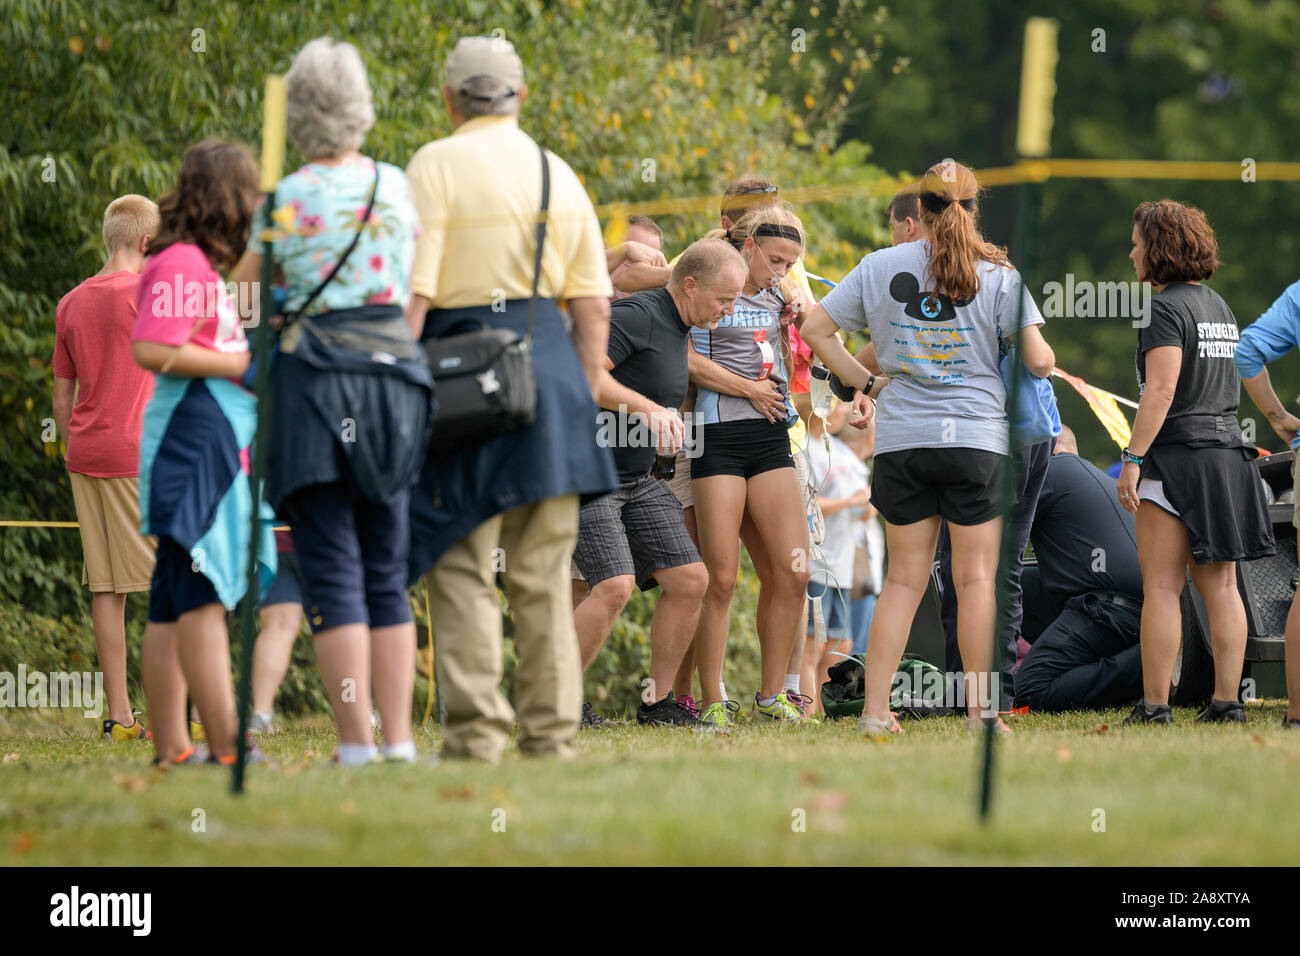 Lancaster, Ohio / USA - 9/24/2016: Exhaustion overwhelms competitor at the Bob Reall Invitational Cross Country Track Meet. Stock Photo